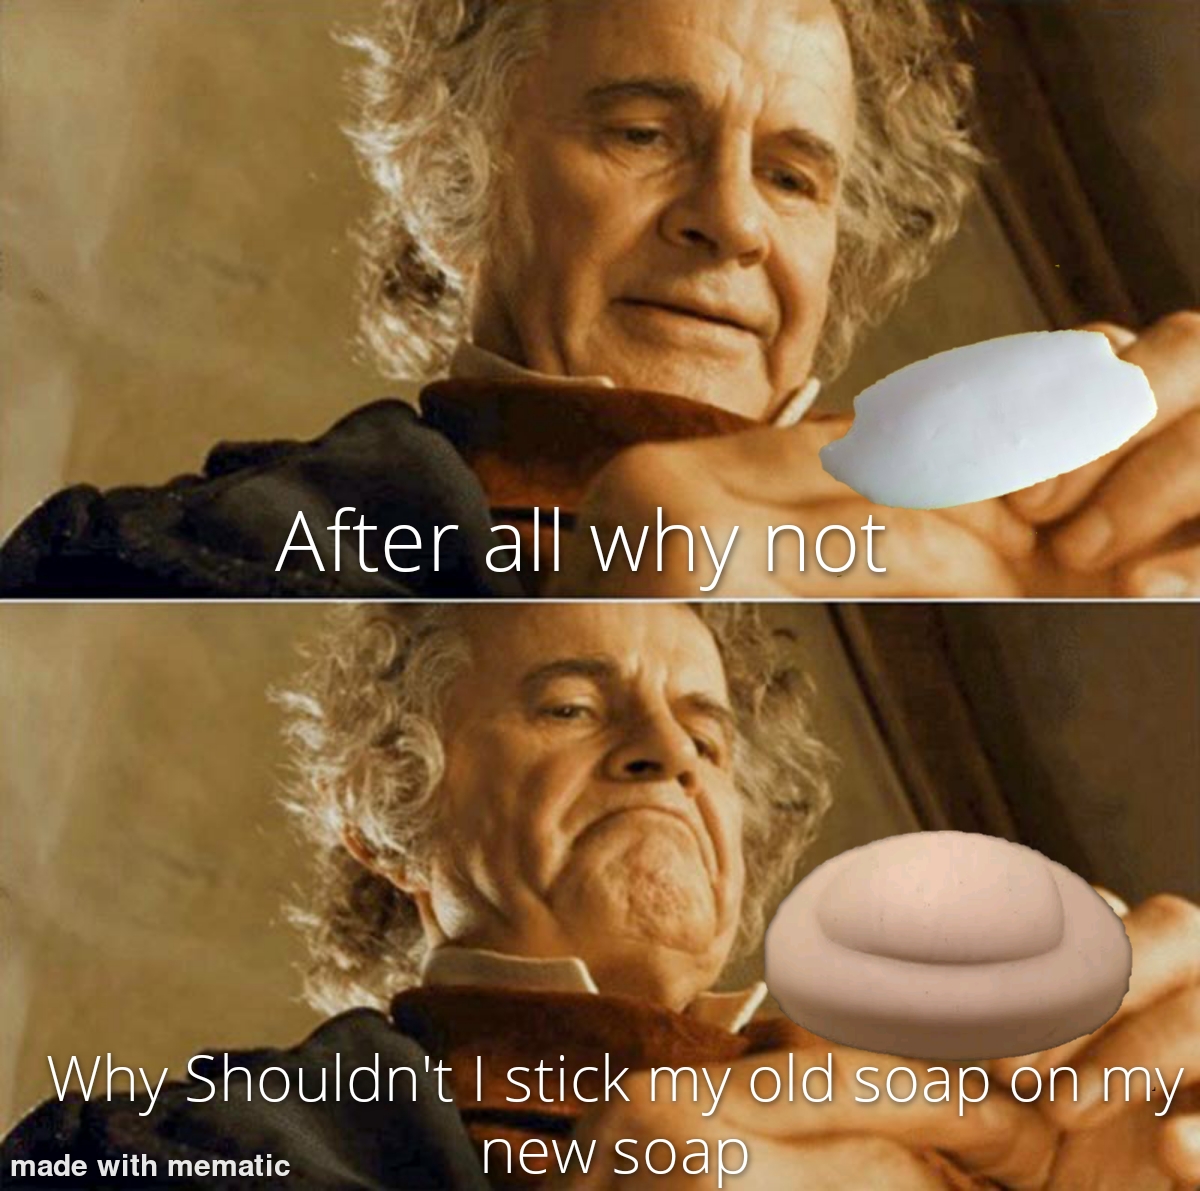 subnautica below zero memes - After all why not Why Shouldn't I stick my old soap on my new soap made with mematic